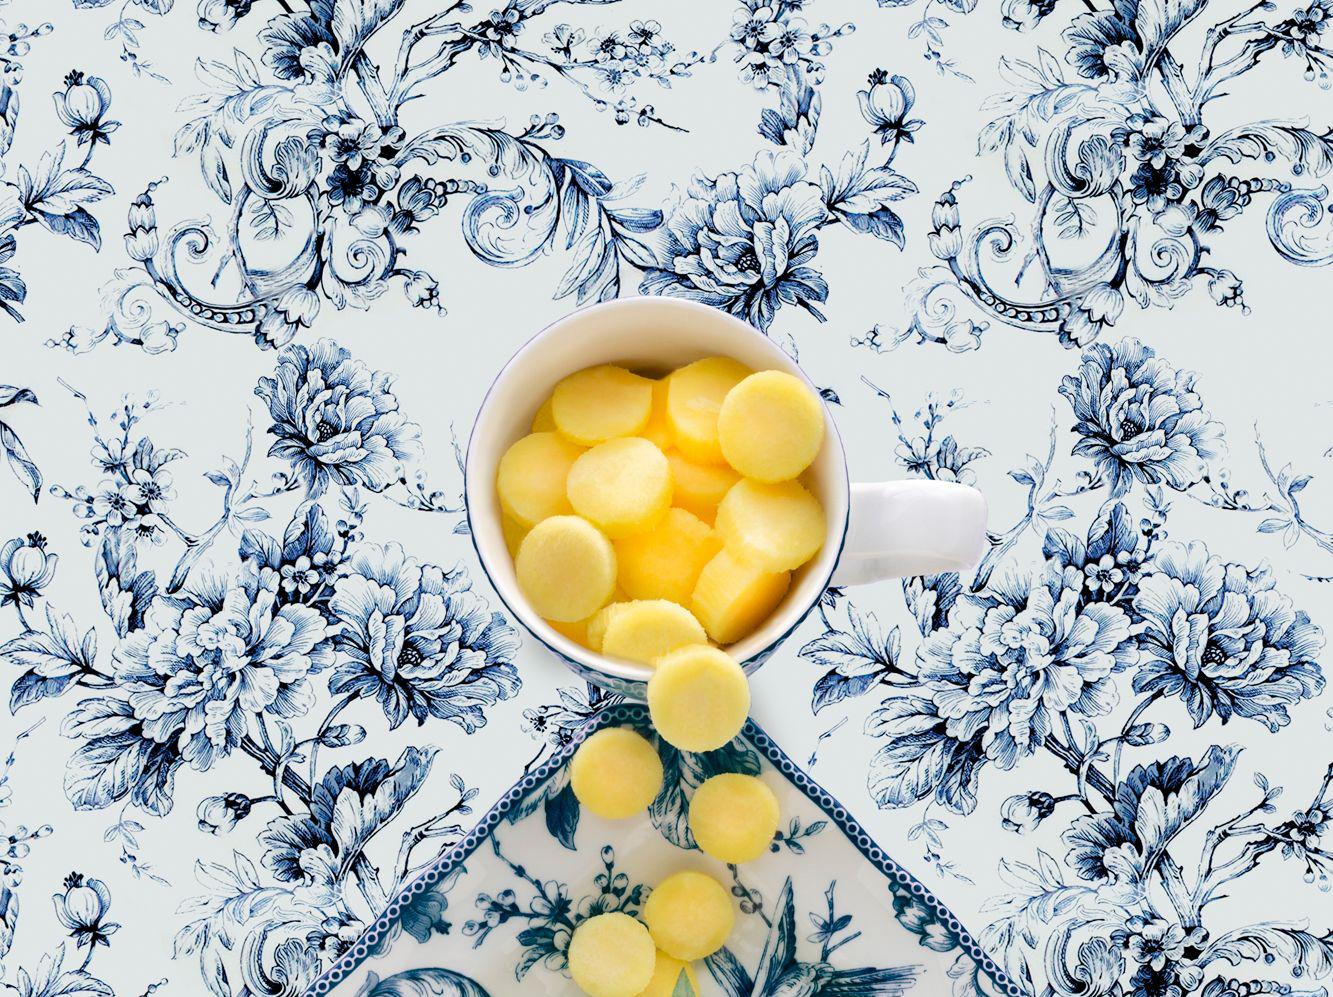 Adelaide Blue with Pineapple - Blue, white & yellow floral food still life - Photograph by JP Terlizzi